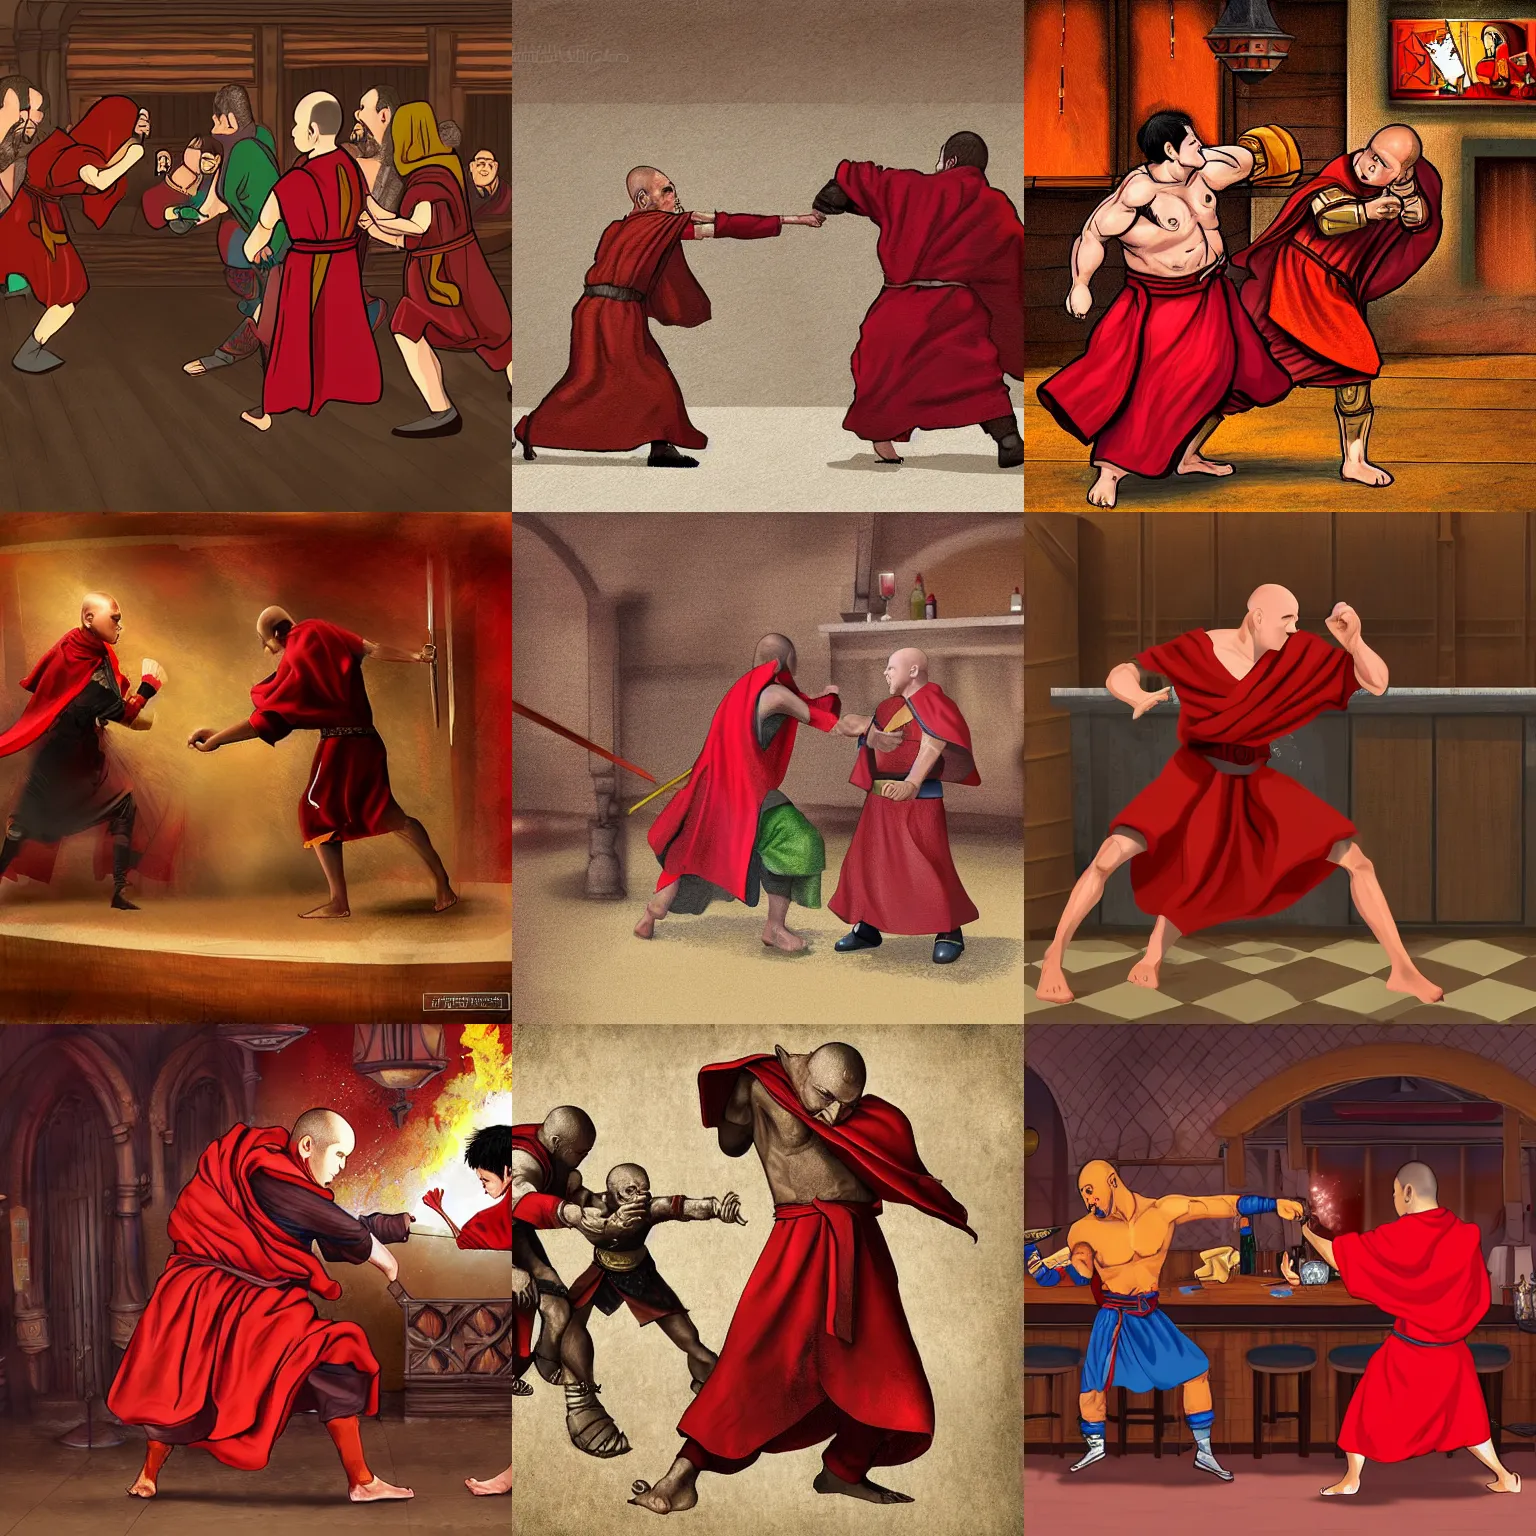 Prompt: A small monk with a red cloak punching a large knight in his stomach in the middle of a bar brawl, digital art, realistic